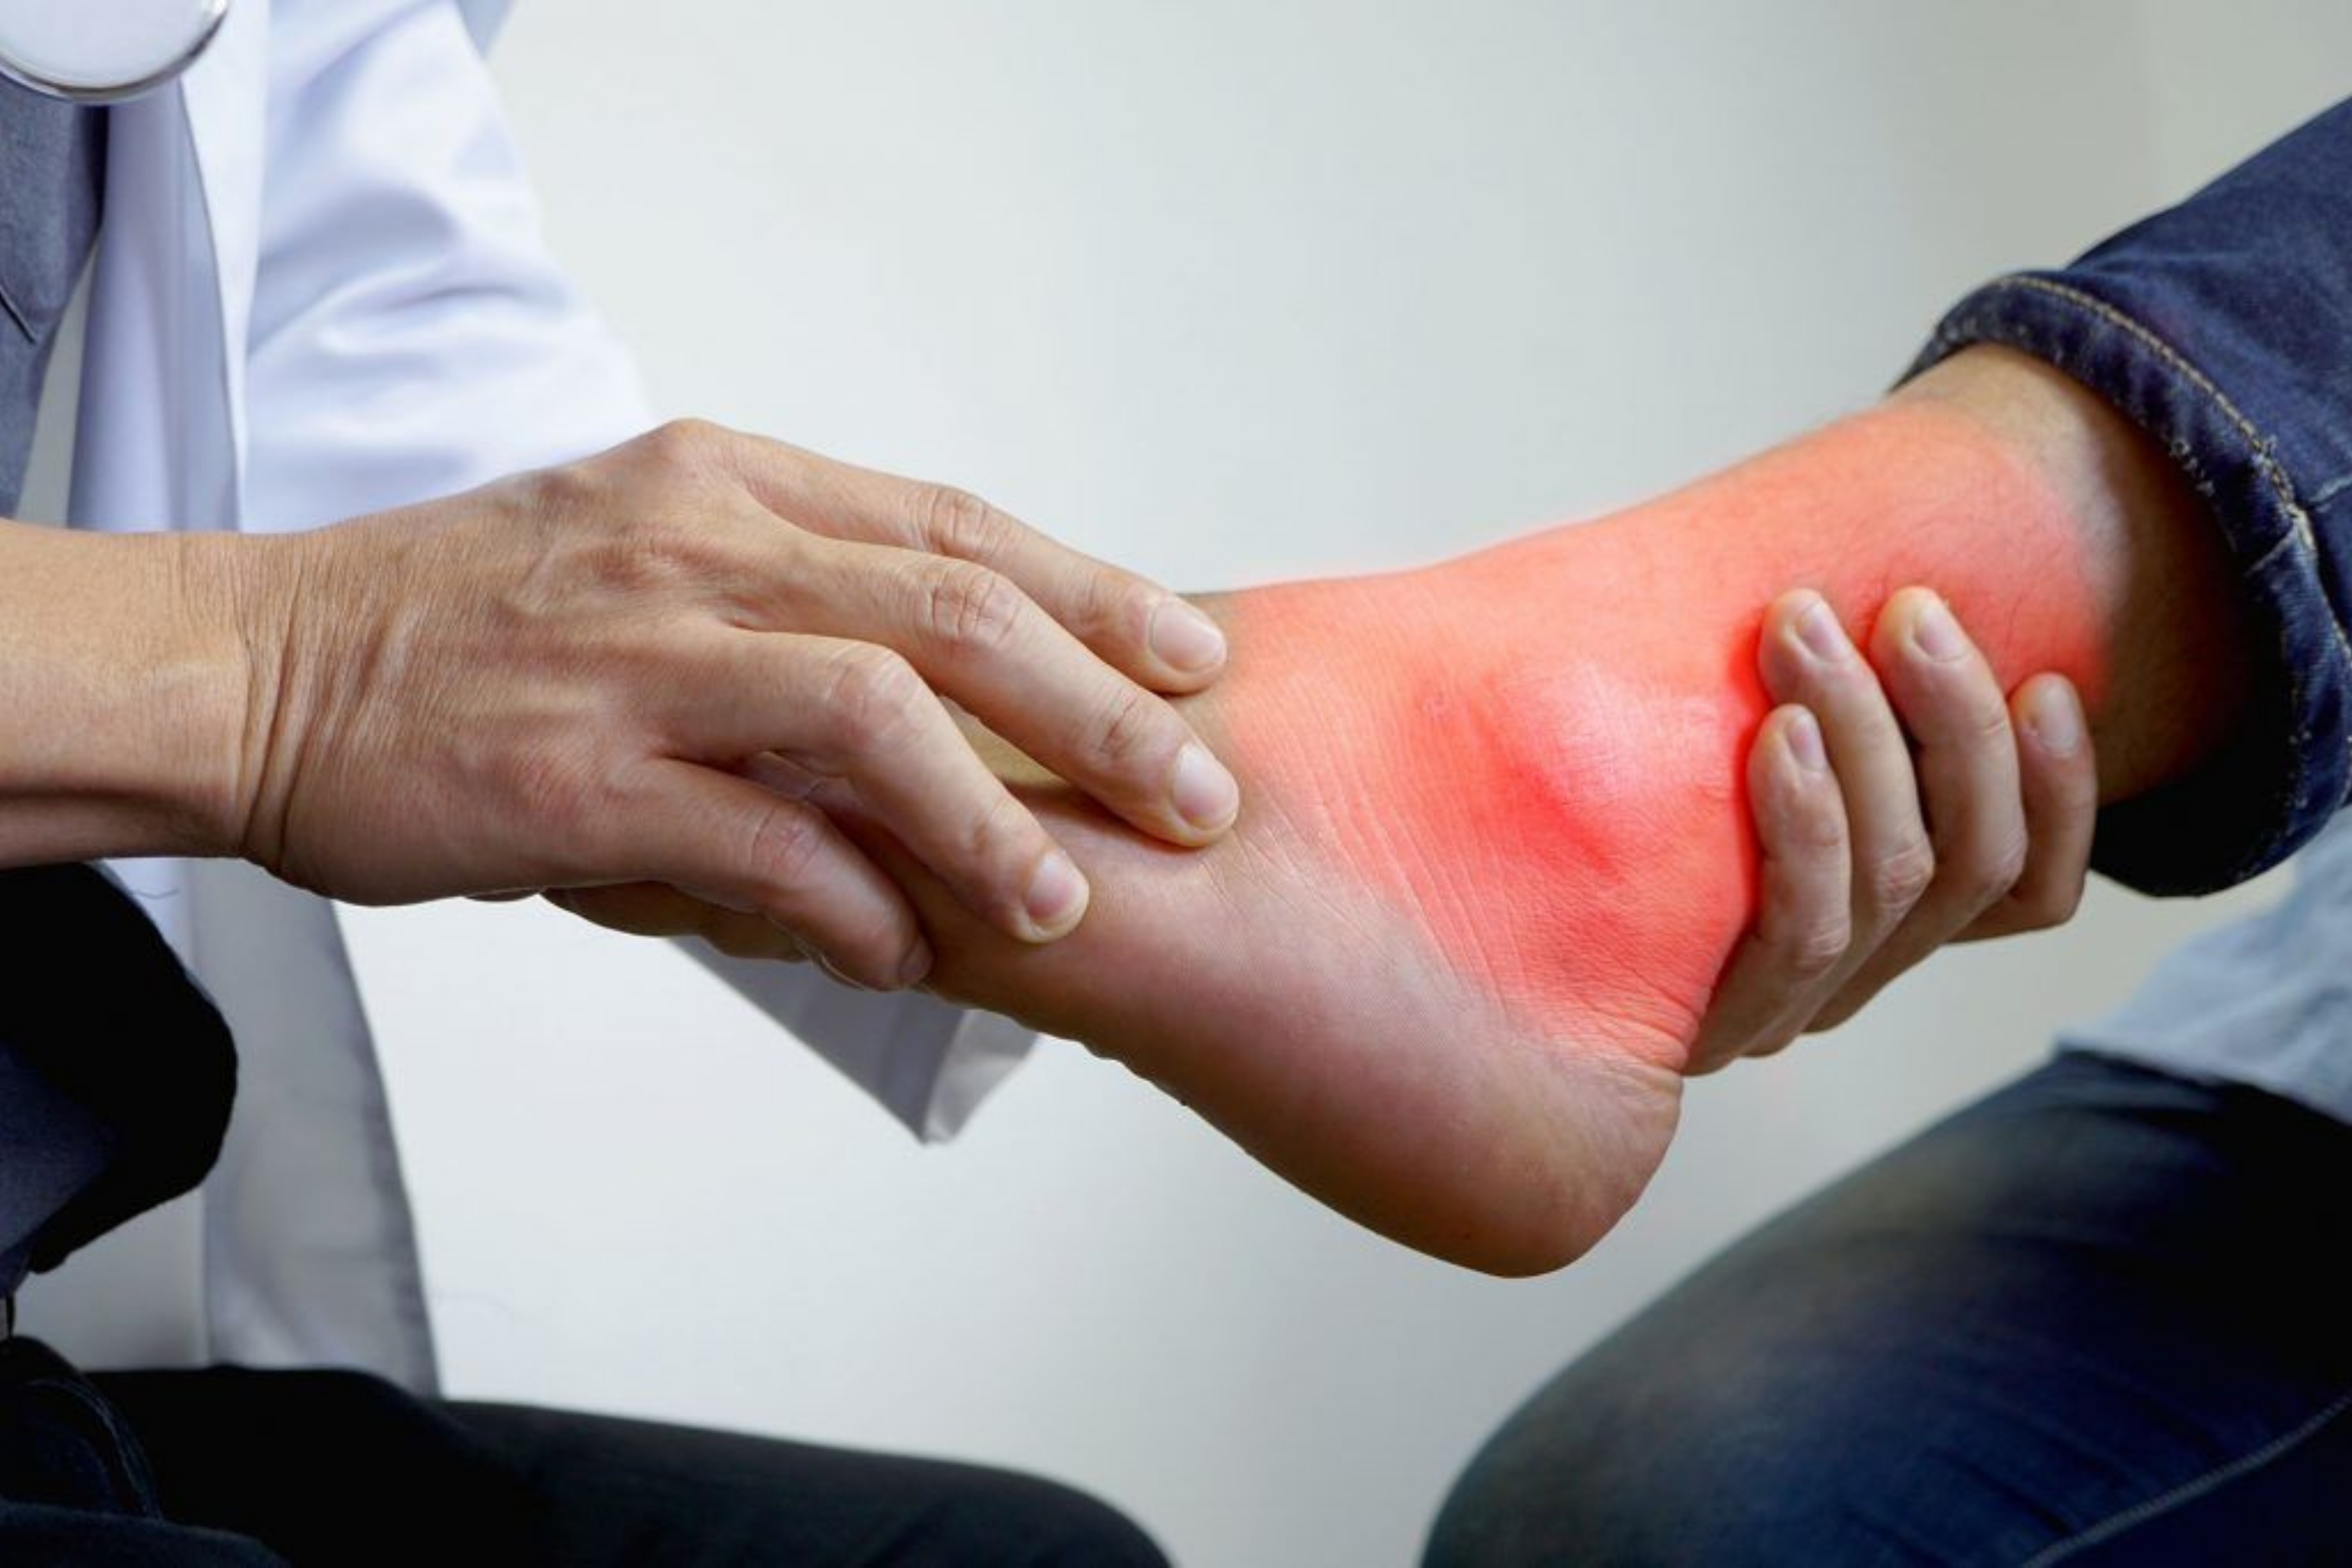 Did I Bruise Or Fracture My Heel? - The Orthopaedic Foot & Ankle Center